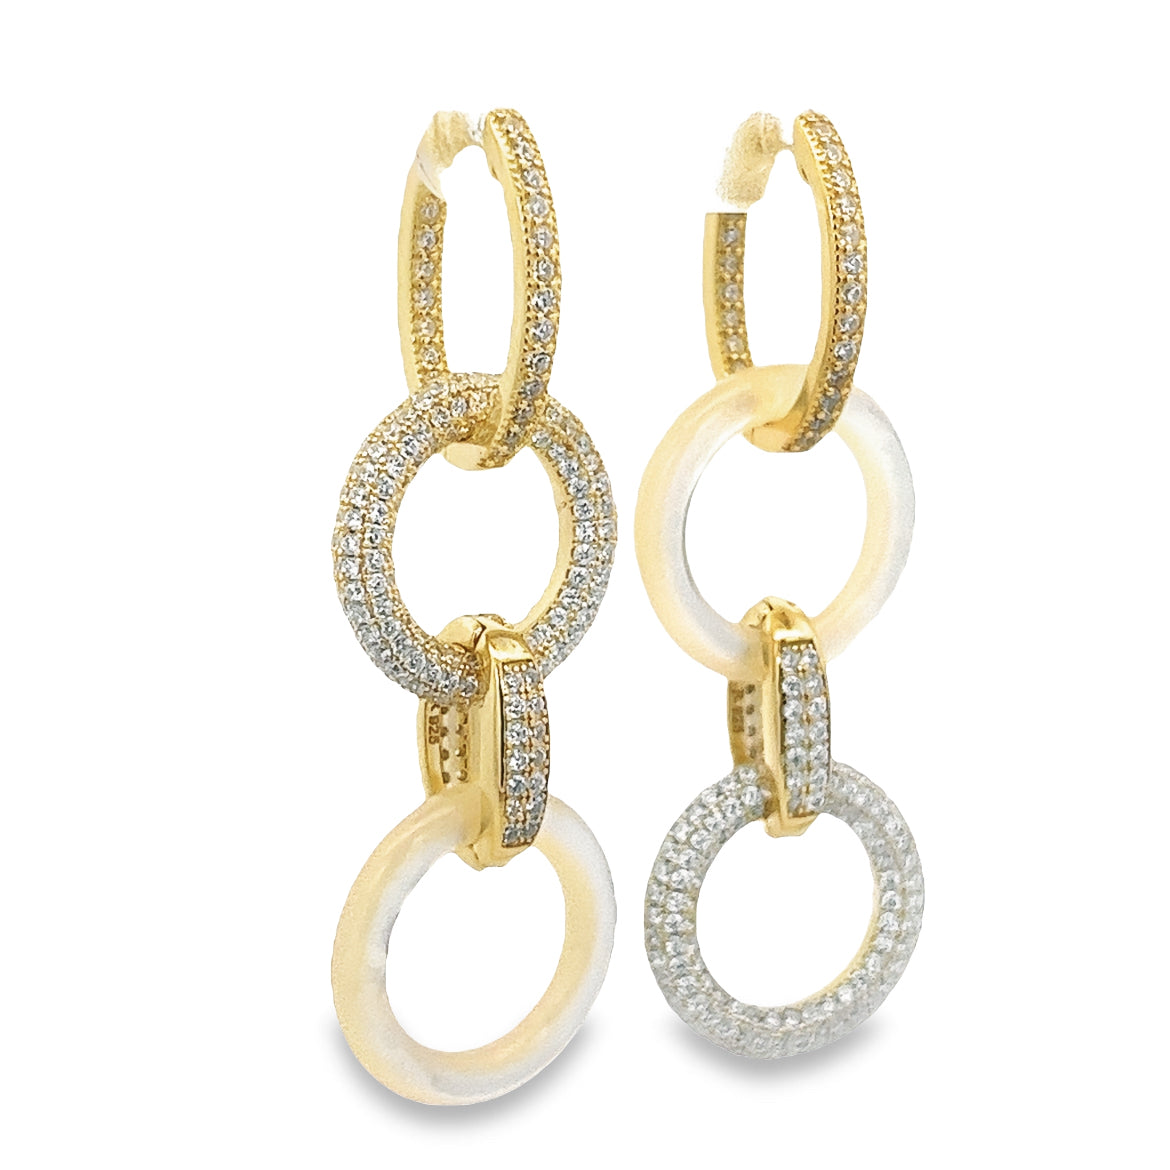 925 SILVER GOLD PLATED PAVE EARRINGS WITH MOTHER OF PEARL